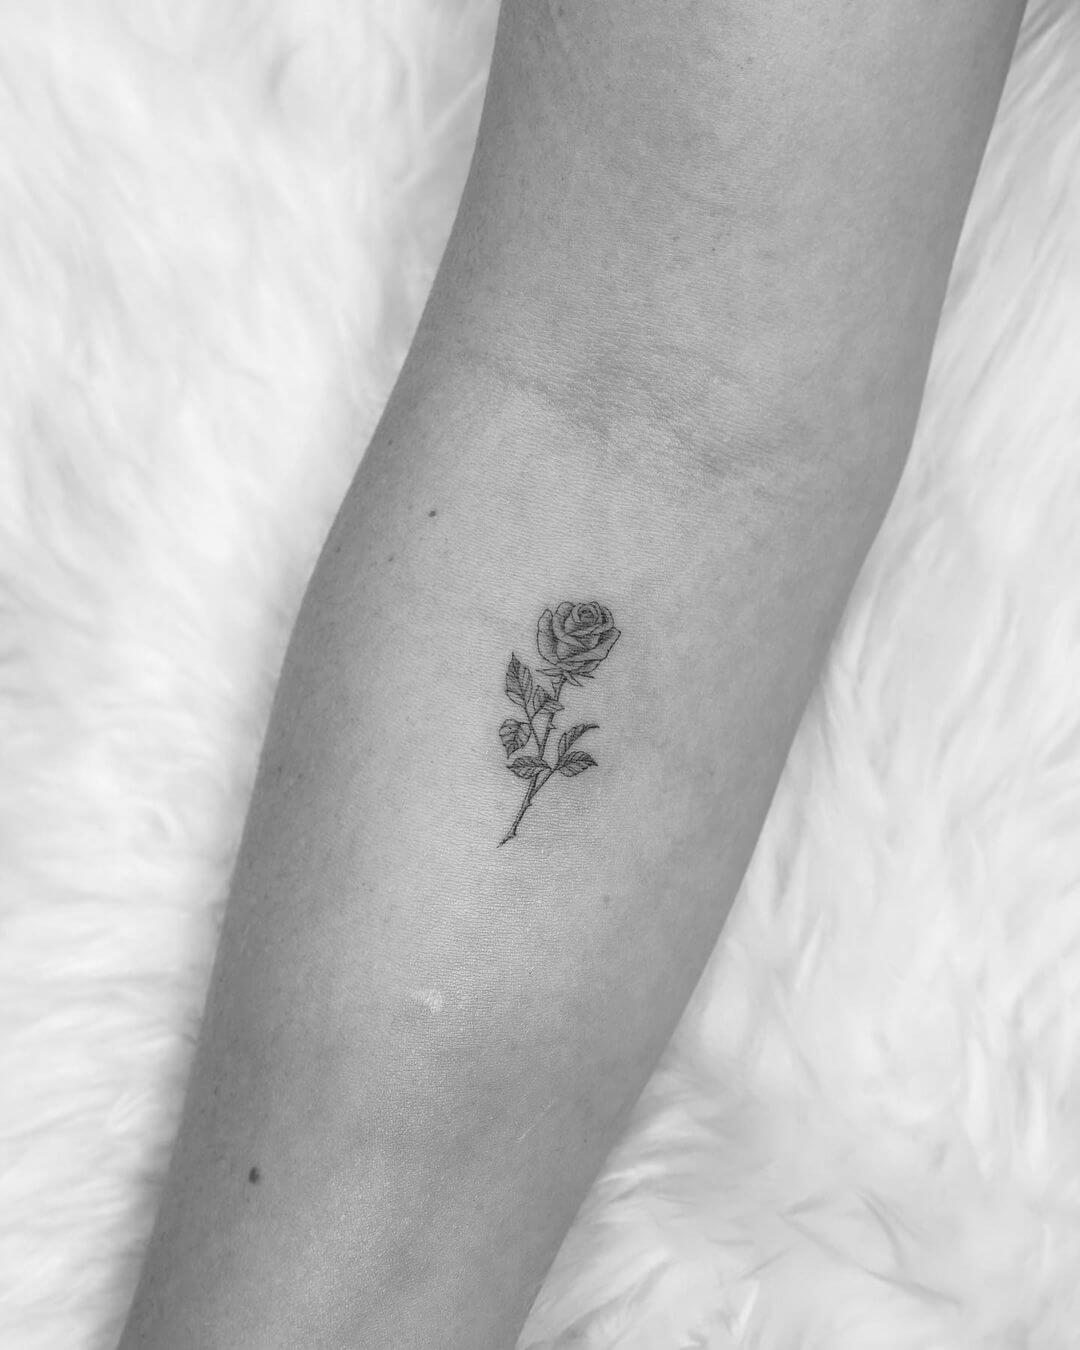 101 Best Small Rose Tattoo Ideas You Have To See To Believe! - Outsons